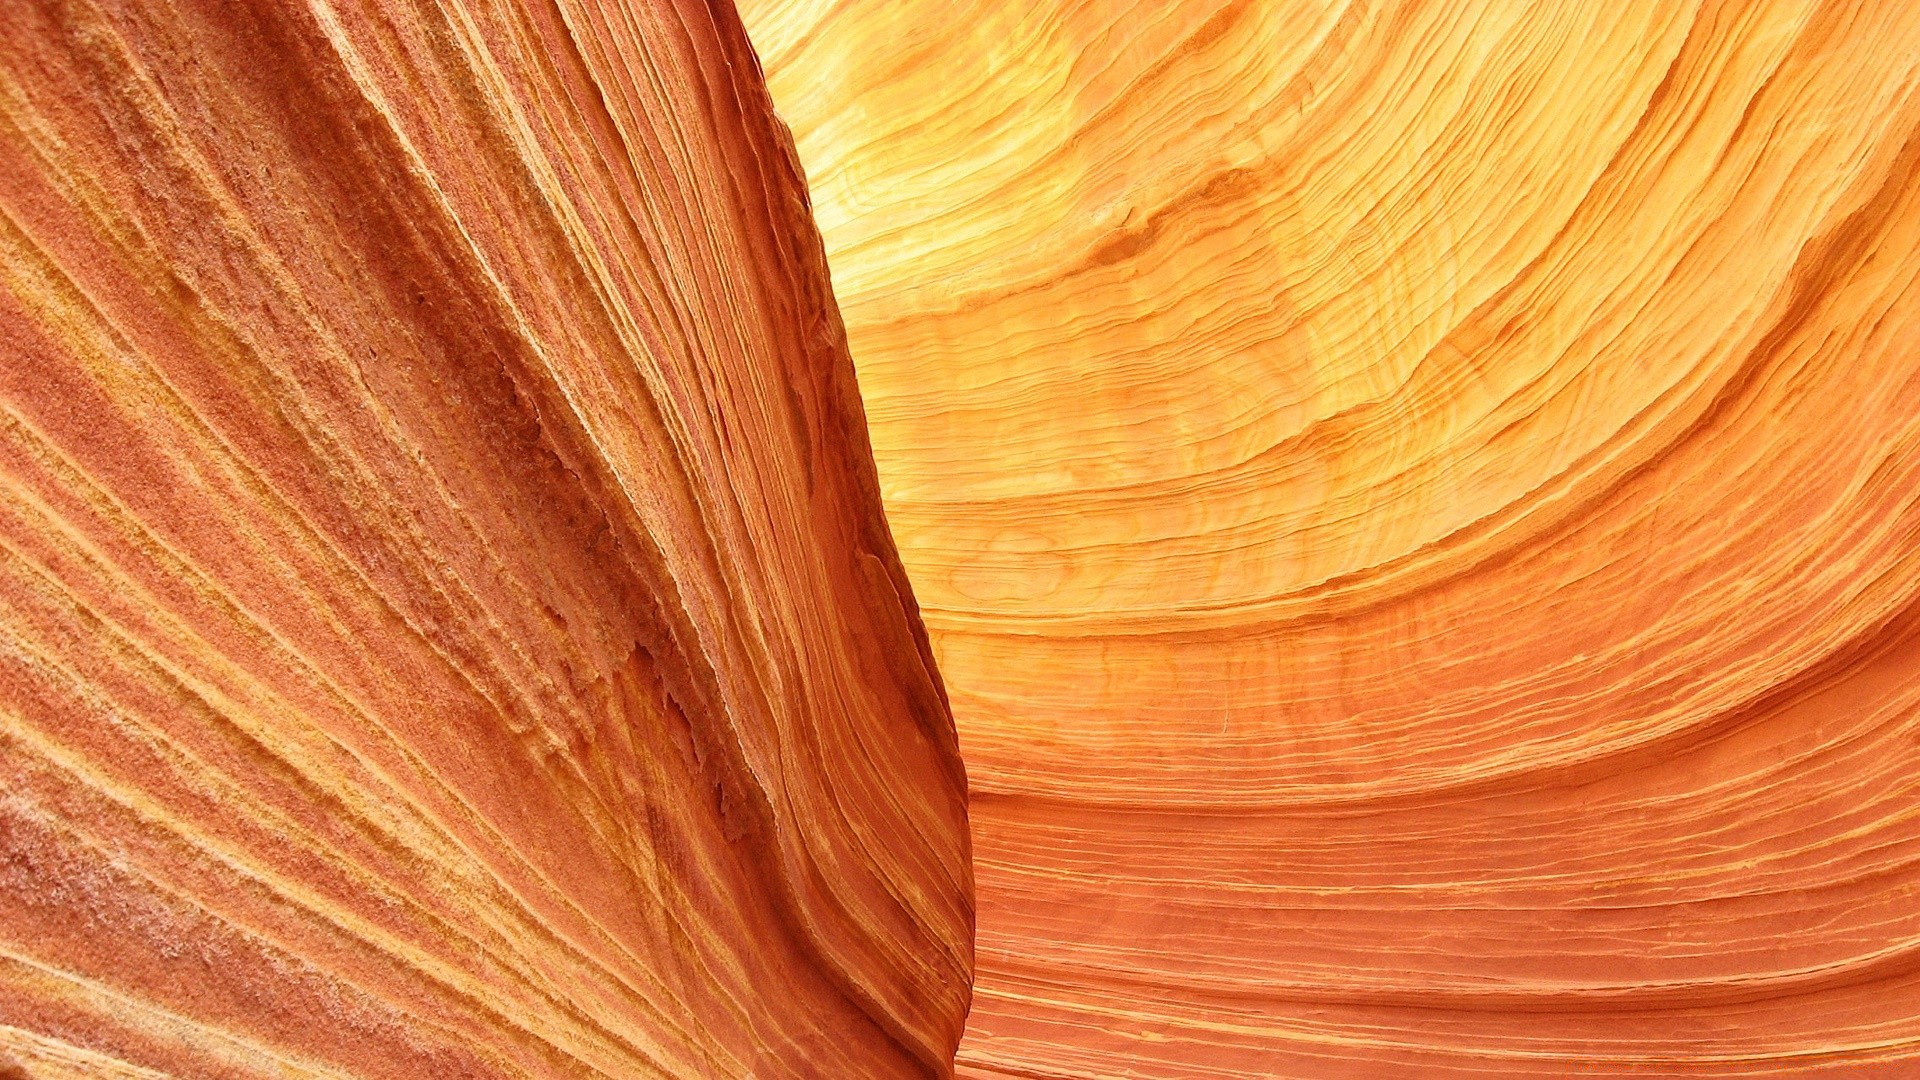 desert texture sandstone nature abstract pattern stripe erosion desktop wood geology smooth dry canyon curl